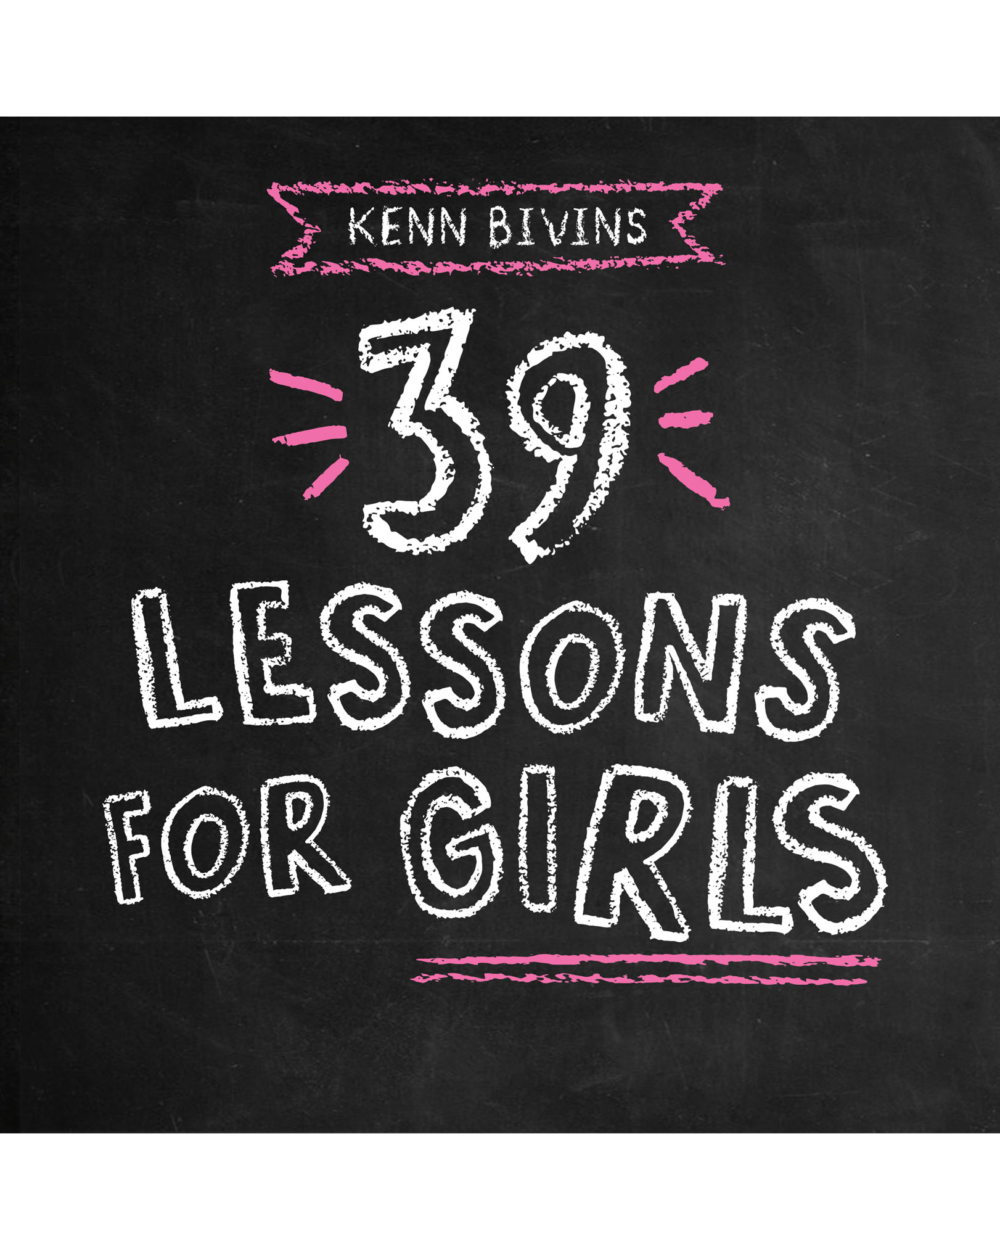 39 Lessons front